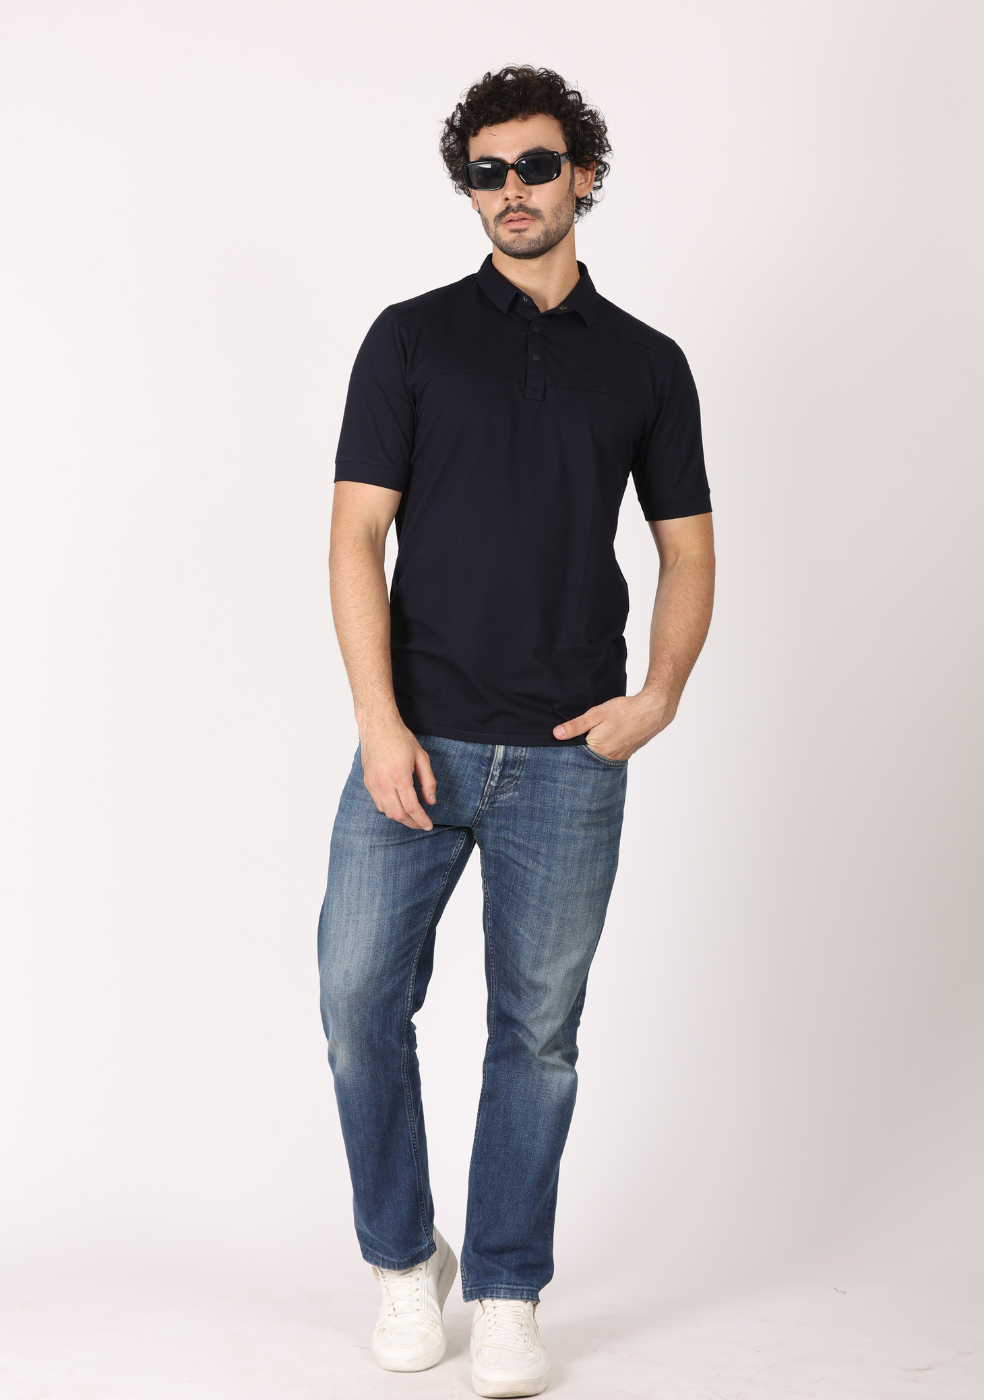 Stylish polo t shirts for men